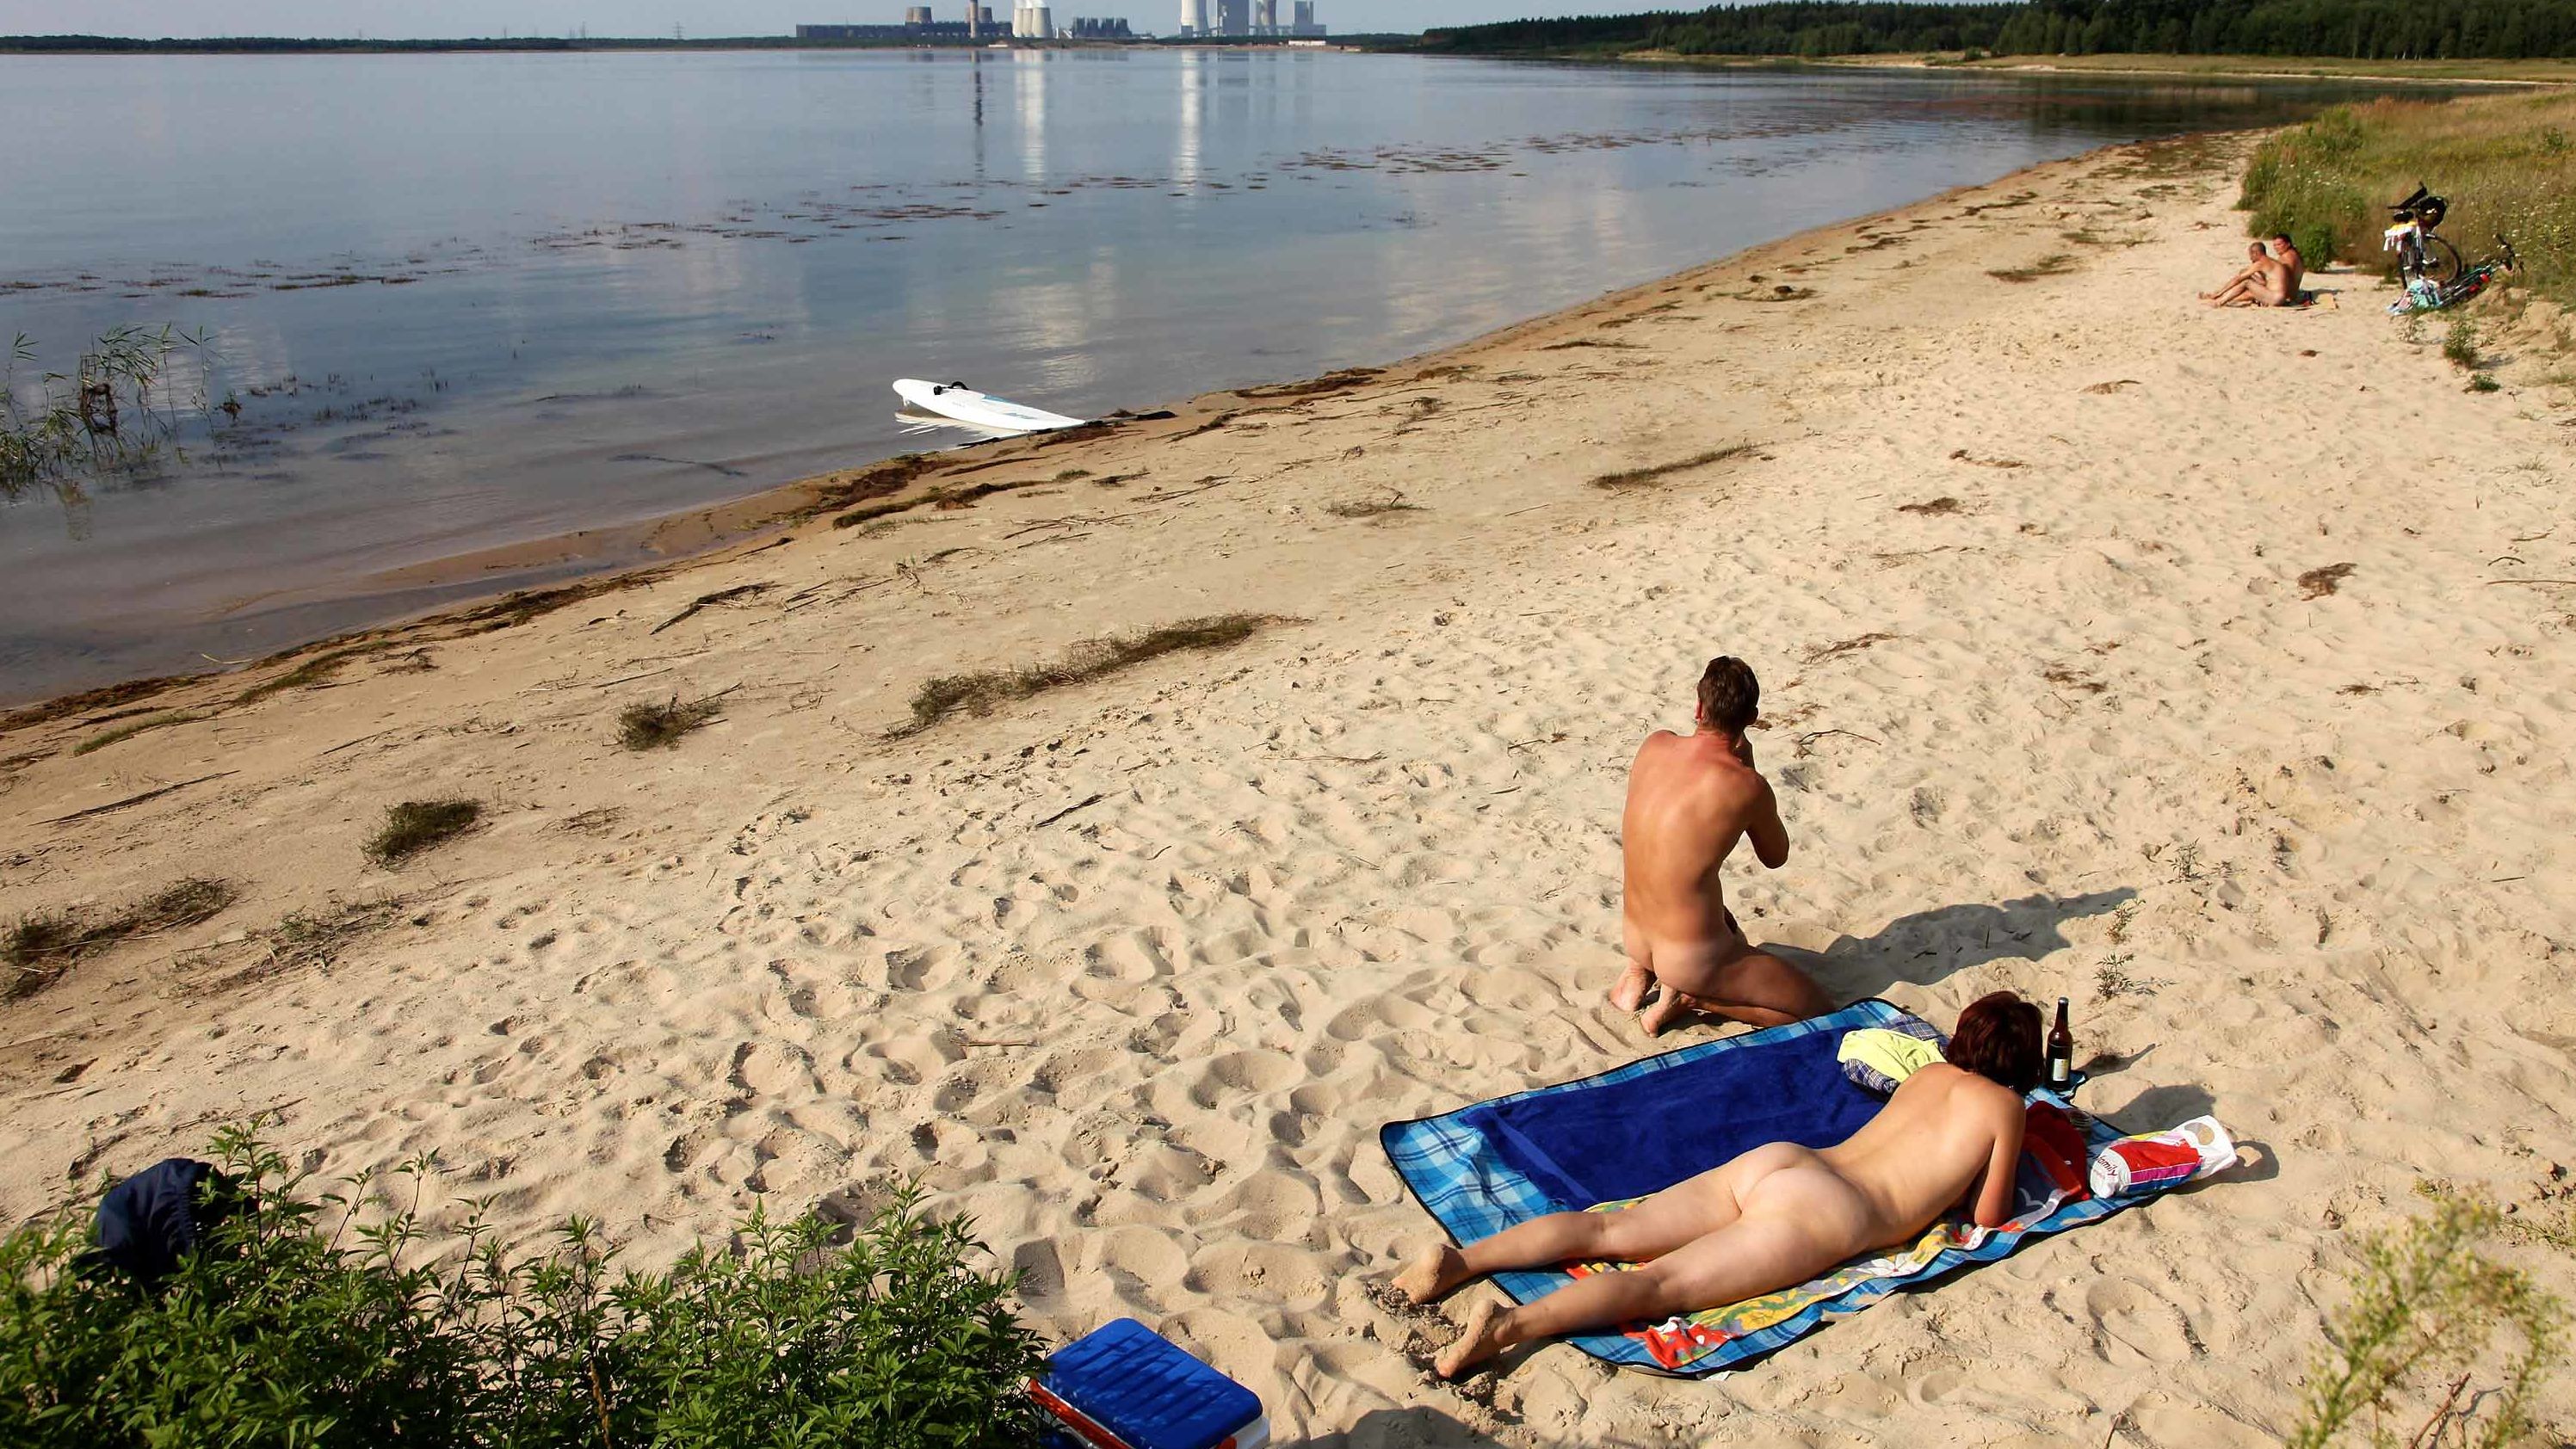 Nudist Colony Beach Sex - Nudity in Germany: The naked truth is revealed | CNN